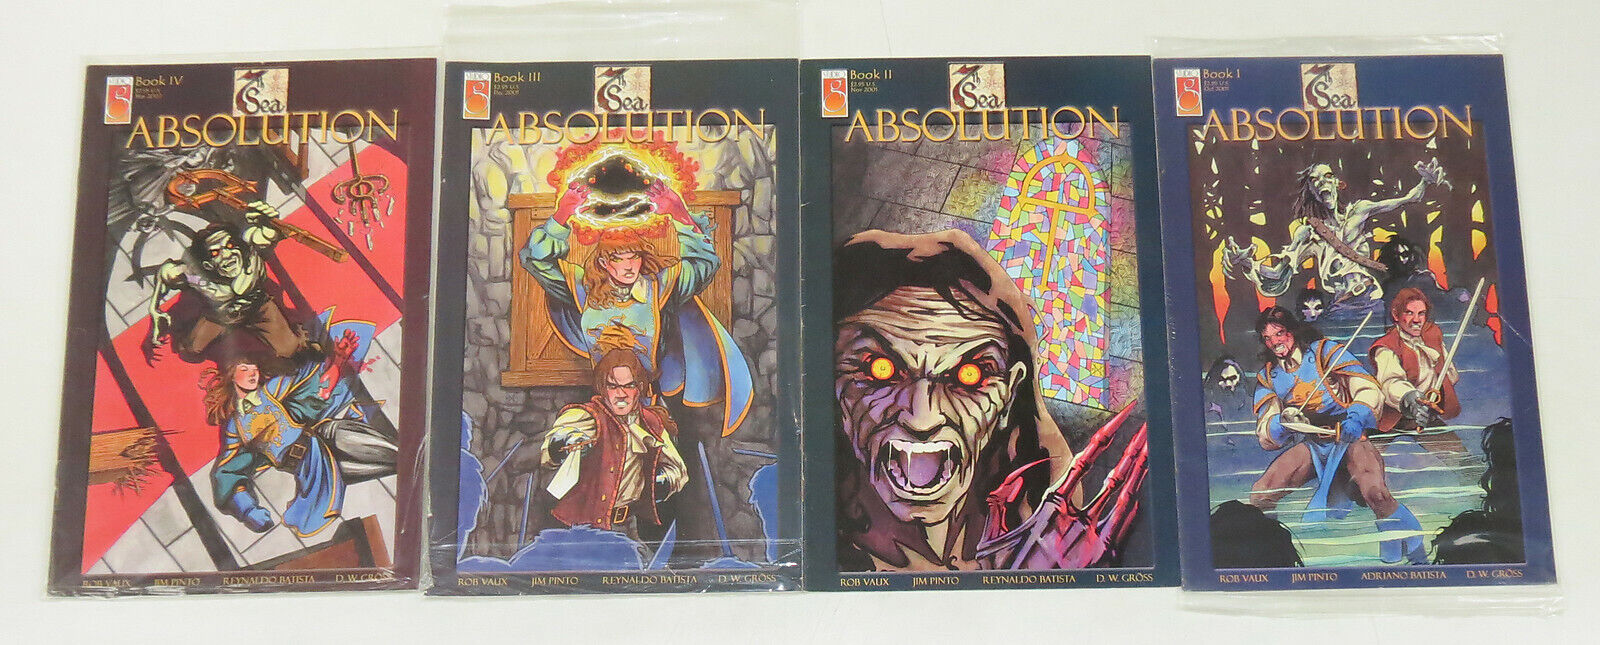 7th Sea: Absolution #1-4 VF/NM complete series based on RPG studio g set lot 2 3